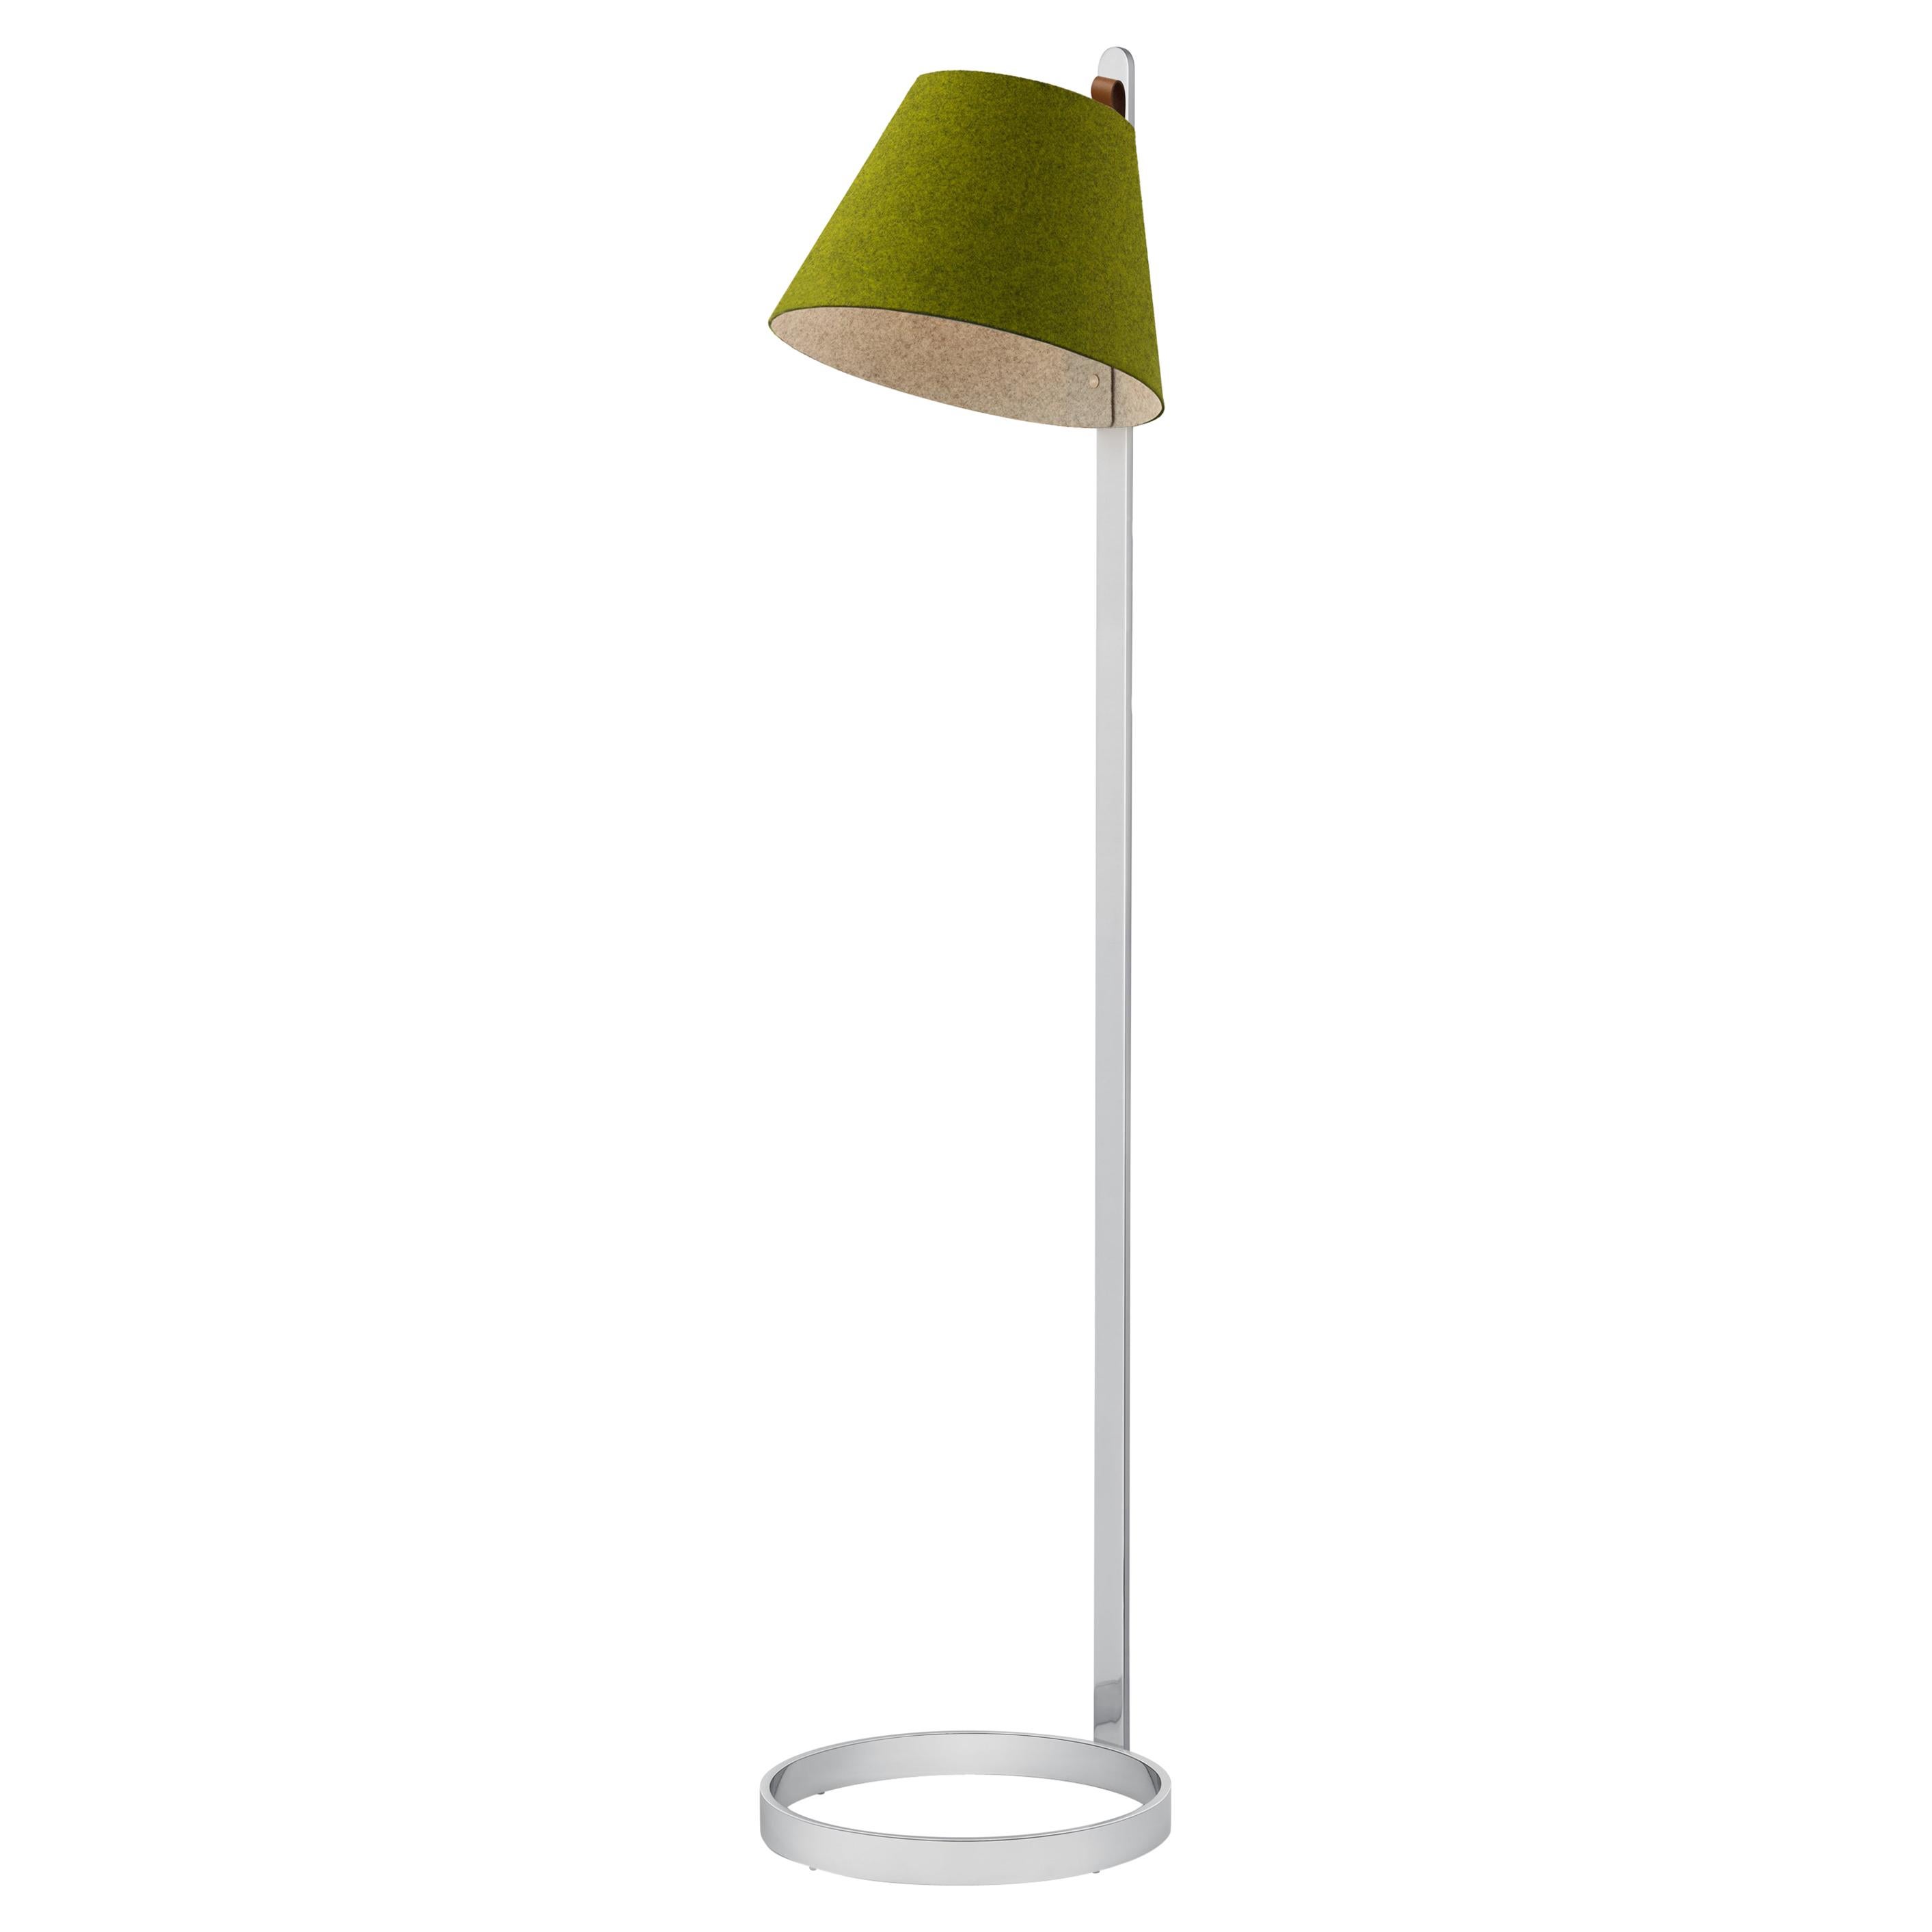 Lana Floor Lamp in Moss and Grey with Chrome Base by Pablo Designs